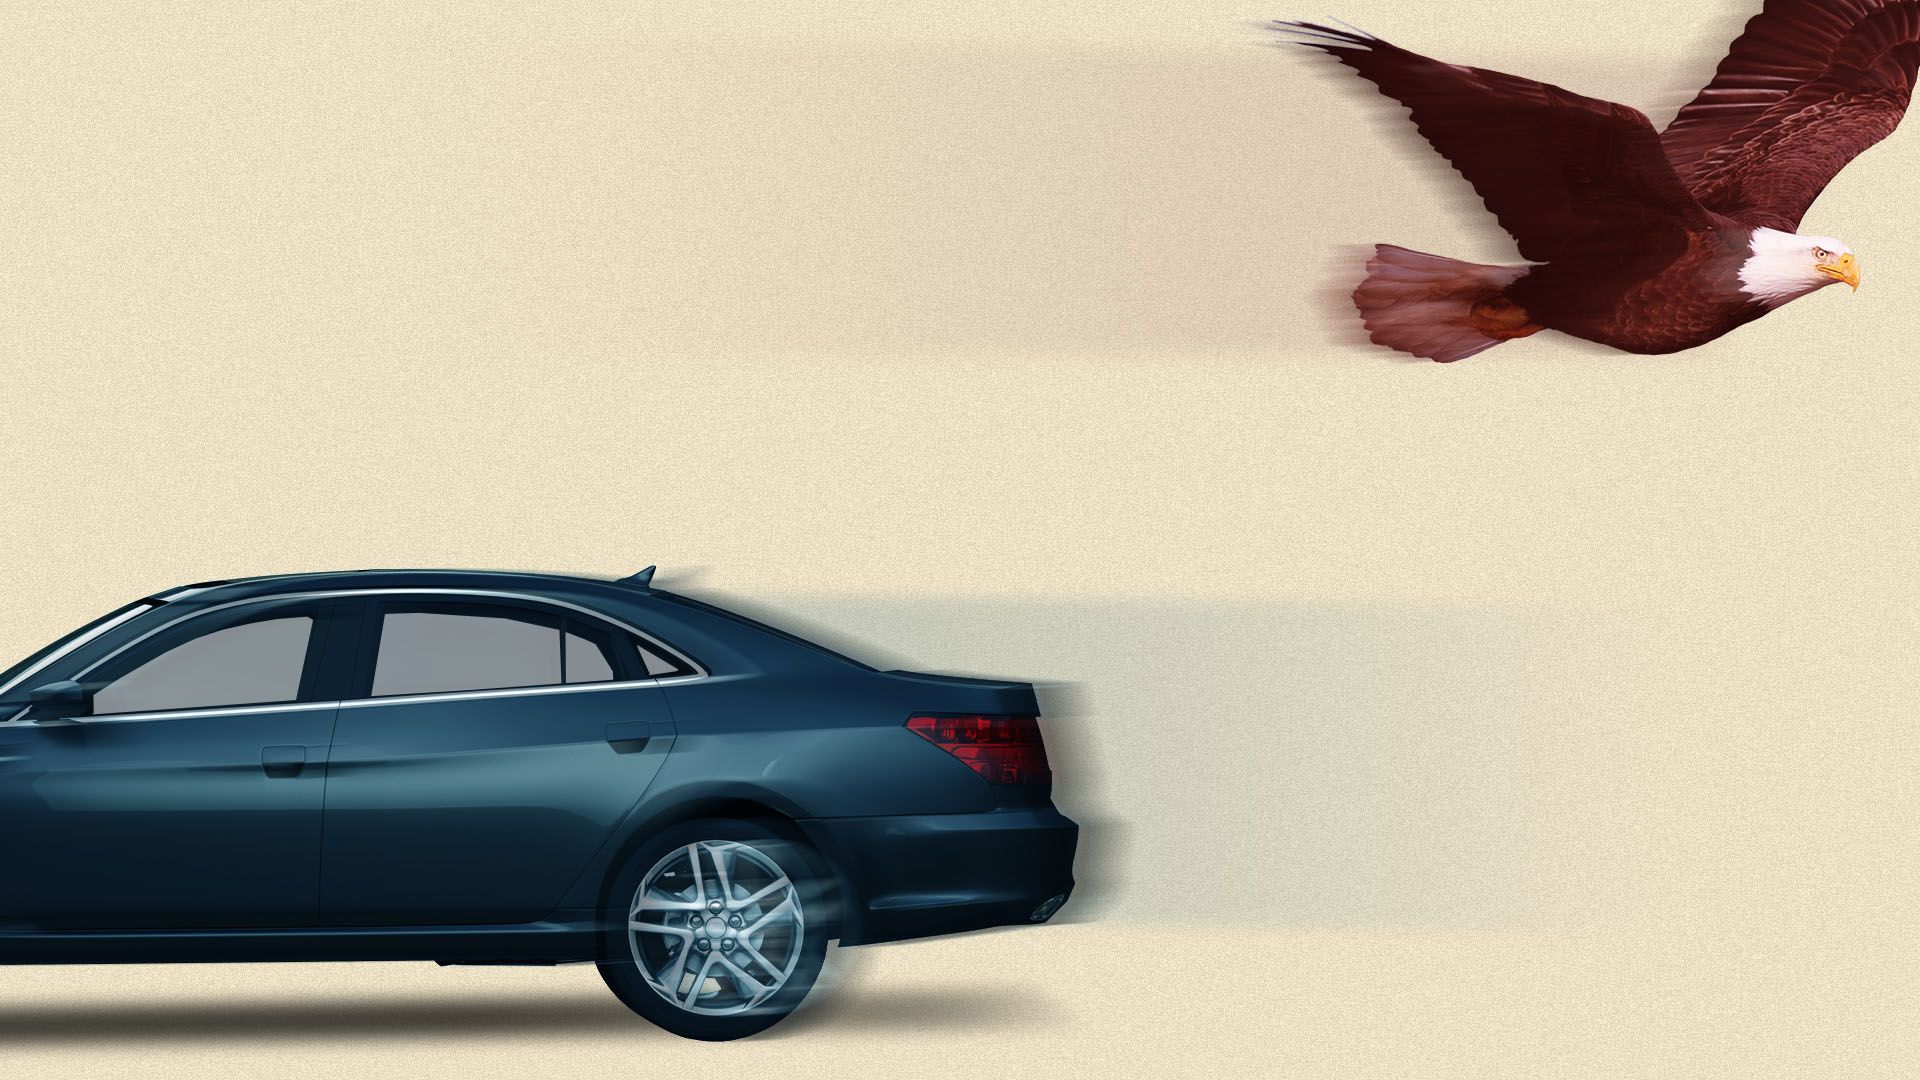 Illustration of a speeding car with a flying eagle above it passing by in the opposite direction